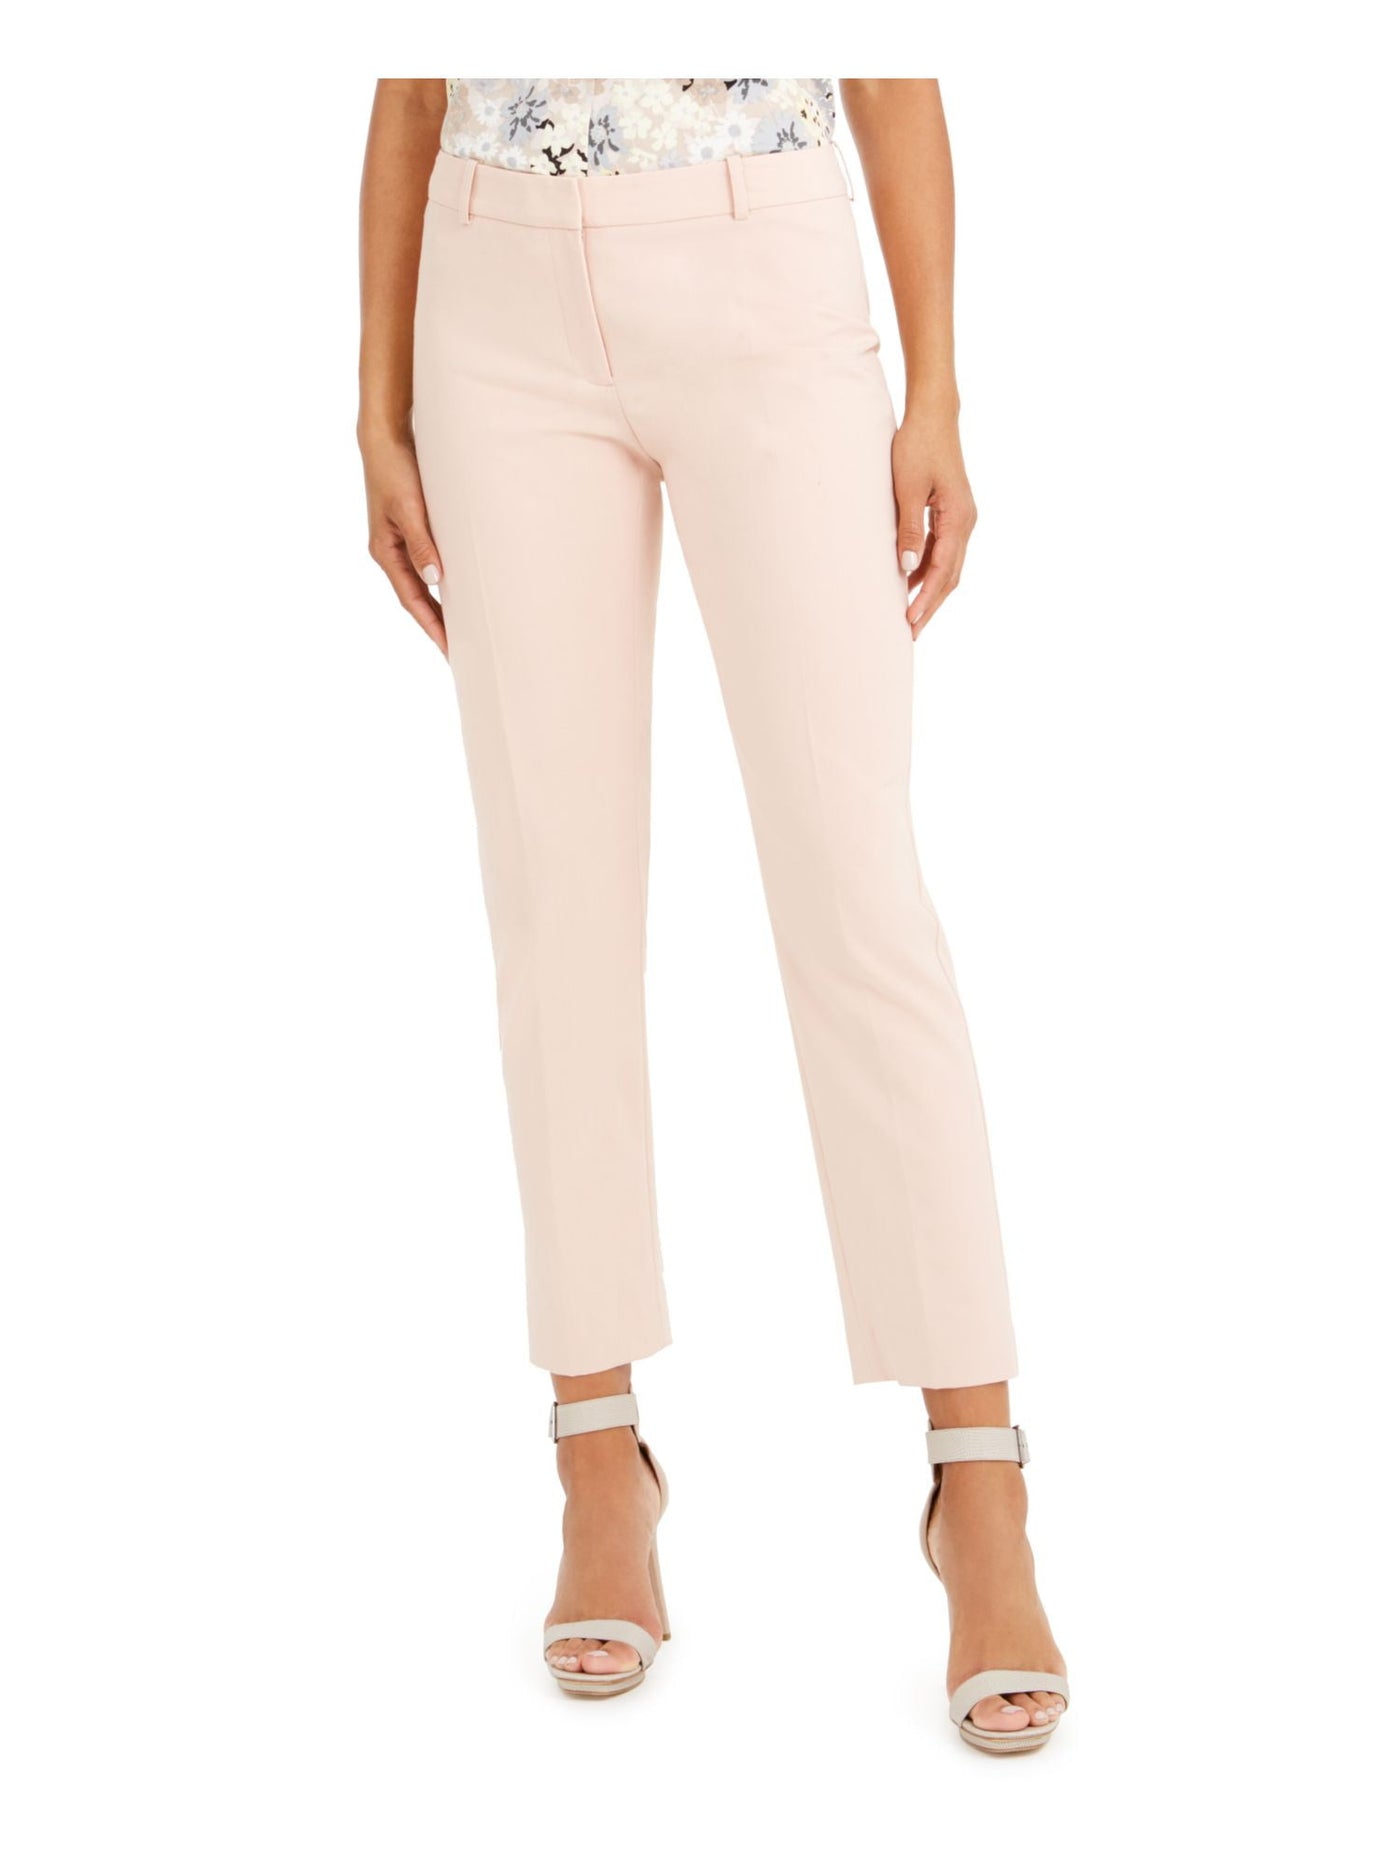 MICHAEL KORS Womens Pink Zippered Pocketed Ankle Length Wear To Work Straight leg Pants 2